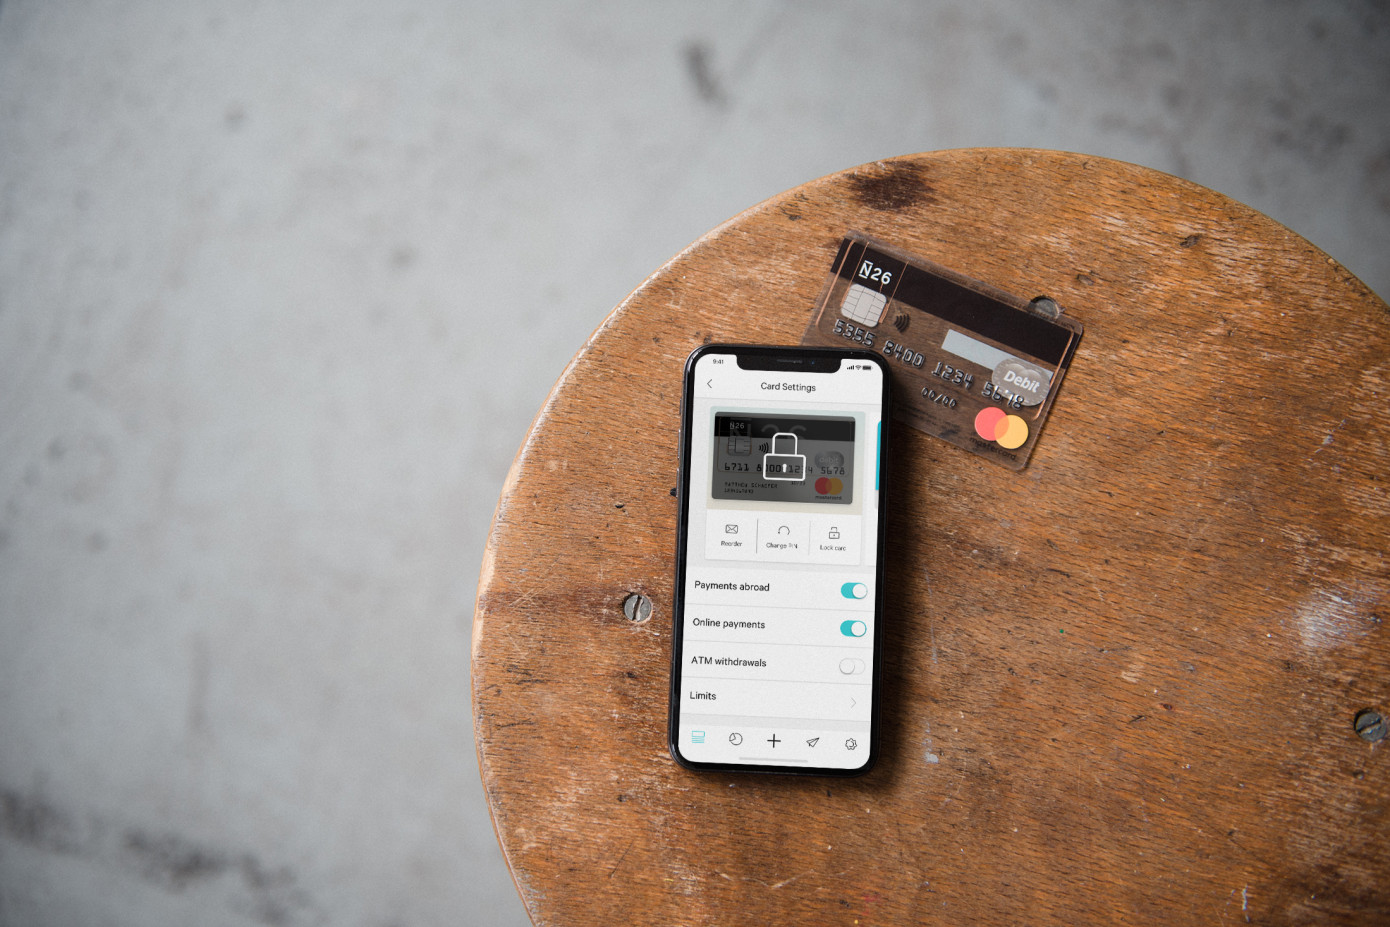 N26 Eyes Value of About $10 Billion in Fresh Fundraising